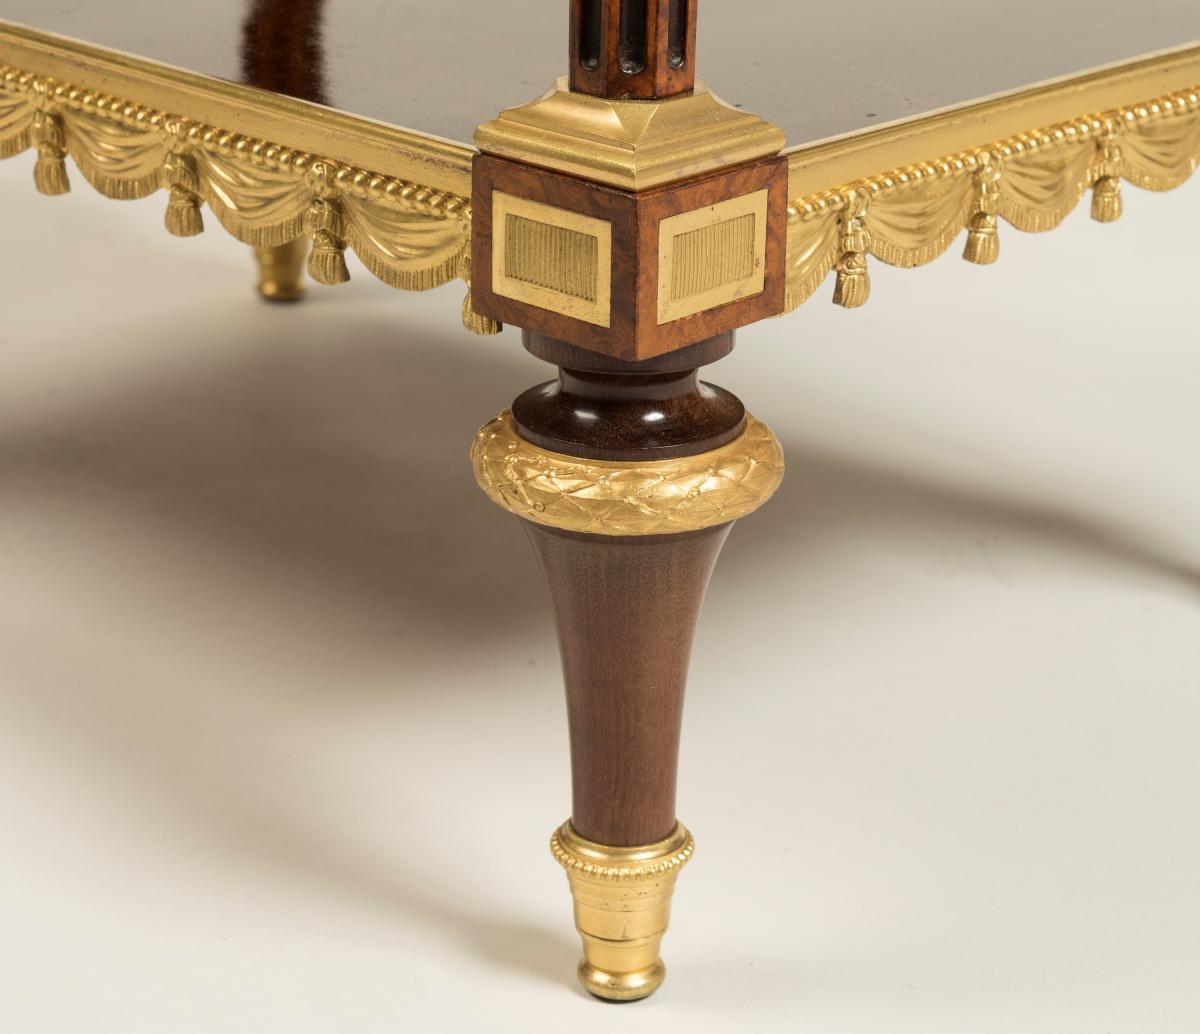 A Fine Side Table in the Louis XVI Manner